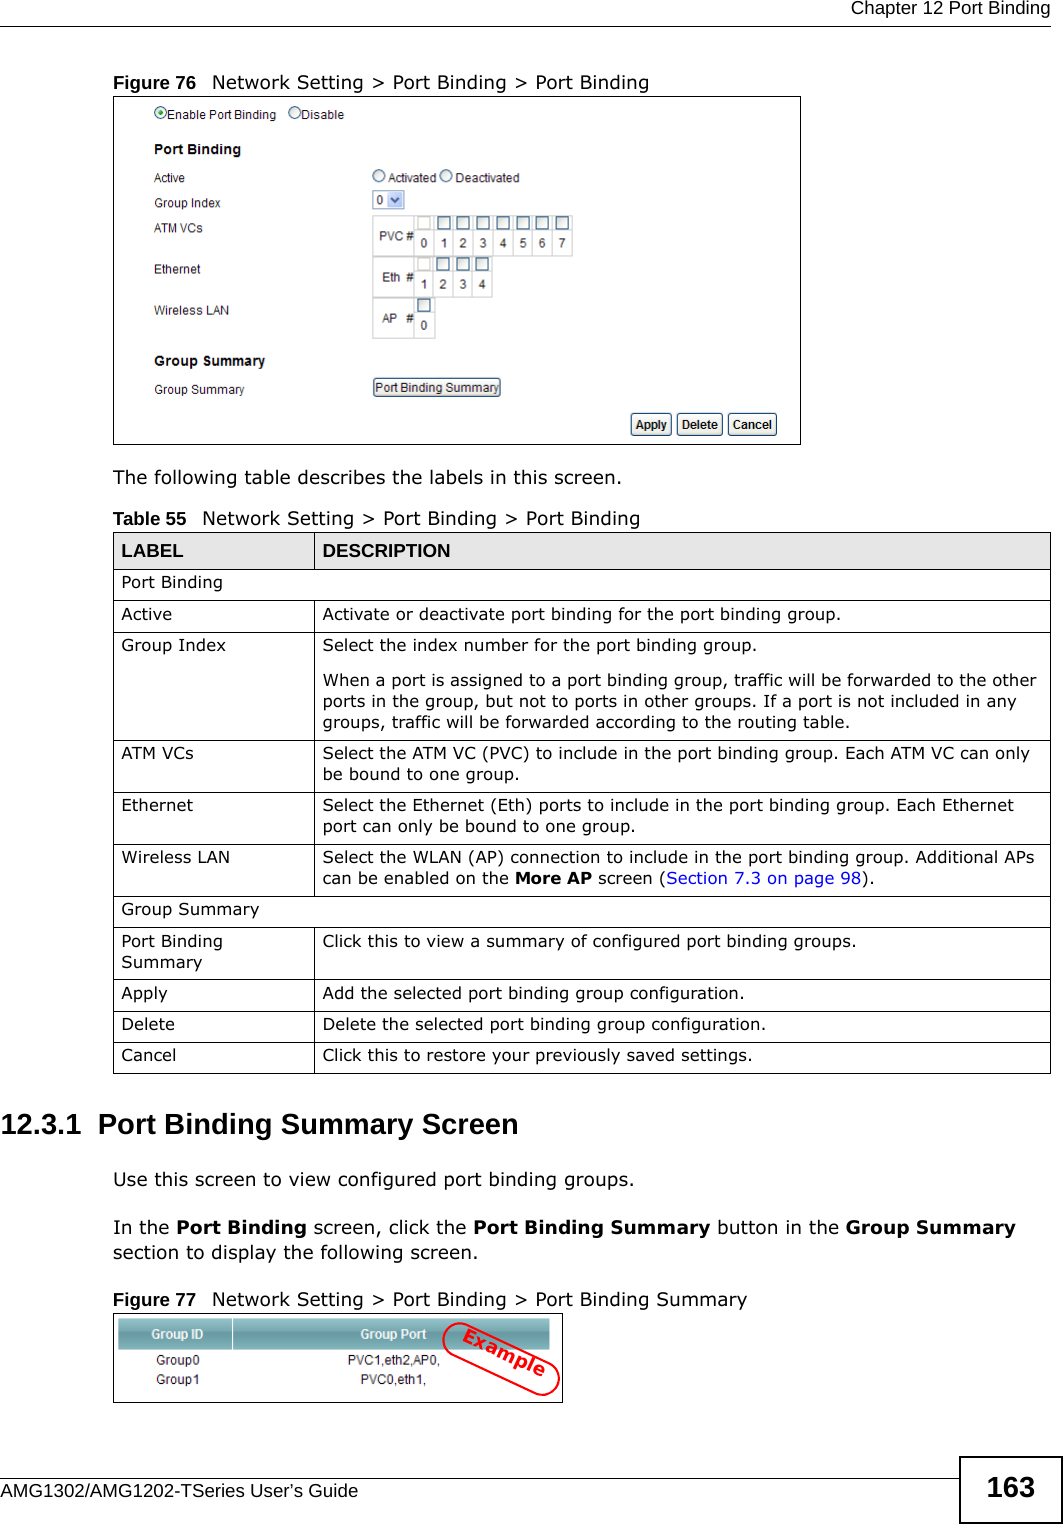  Chapter 12 Port BindingAMG1302/AMG1202-TSeries User’s Guide 163Figure 76   Network Setting &gt; Port Binding &gt; Port BindingThe following table describes the labels in this screen. 12.3.1  Port Binding Summary ScreenUse this screen to view configured port binding groups.In the Port Binding screen, click the Port Binding Summary button in the Group Summary section to display the following screen.Figure 77   Network Setting &gt; Port Binding &gt; Port Binding SummaryTable 55   Network Setting &gt; Port Binding &gt; Port BindingLABEL DESCRIPTIONPort BindingActive Activate or deactivate port binding for the port binding group.Group Index Select the index number for the port binding group. When a port is assigned to a port binding group, traffic will be forwarded to the other ports in the group, but not to ports in other groups. If a port is not included in any groups, traffic will be forwarded according to the routing table.ATM VCs Select the ATM VC (PVC) to include in the port binding group. Each ATM VC can only be bound to one group.Ethernet Select the Ethernet (Eth) ports to include in the port binding group. Each Ethernet port can only be bound to one group.Wireless LAN Select the WLAN (AP) connection to include in the port binding group. Additional APs can be enabled on the More AP screen (Section 7.3 on page 98).Group SummaryPort Binding SummaryClick this to view a summary of configured port binding groups.Apply Add the selected port binding group configuration.Delete Delete the selected port binding group configuration. Cancel Click this to restore your previously saved settings.Example